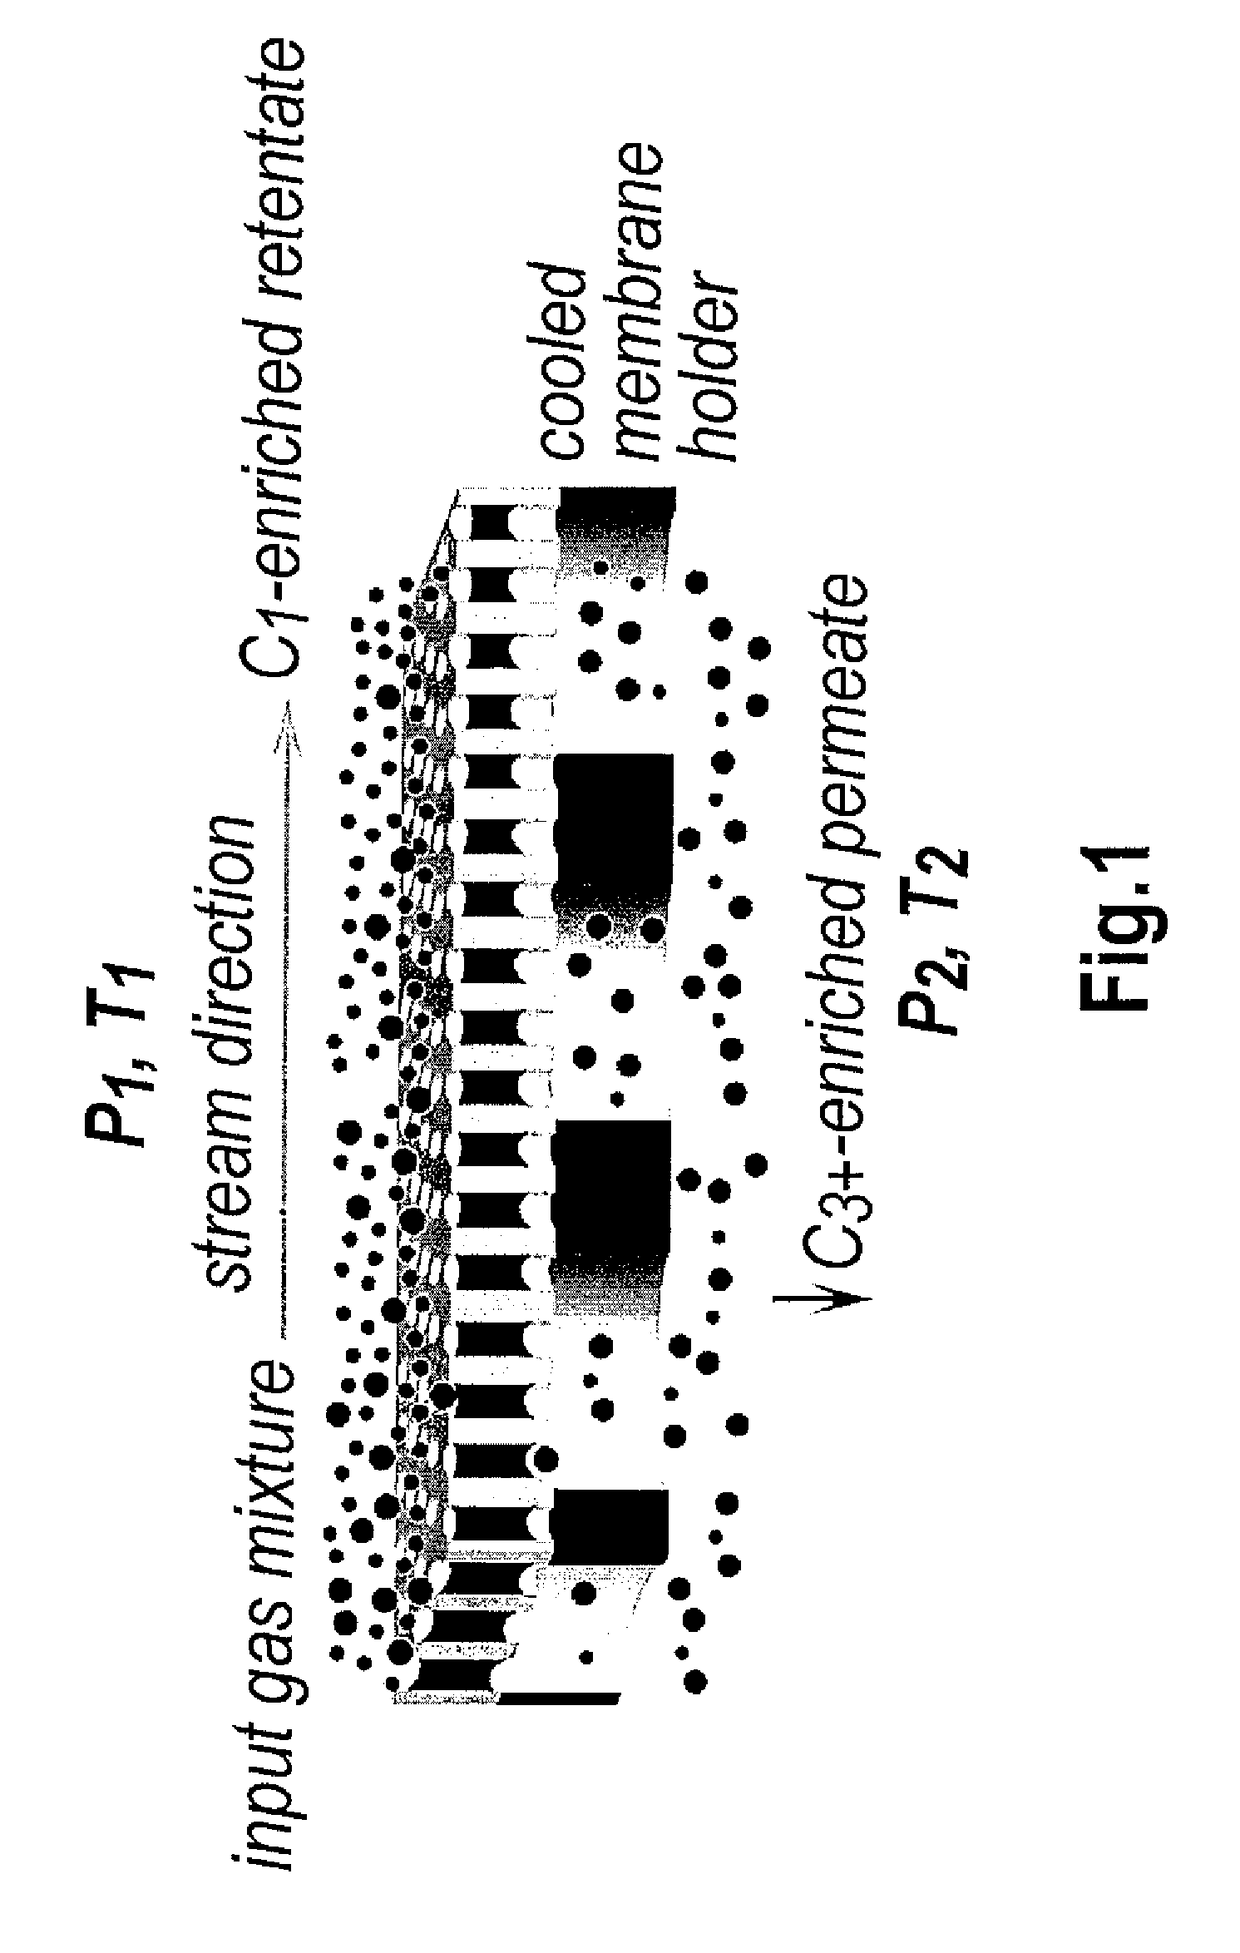 Method of Fractionating Mixtures of Low Molecular Weight Hydrocarbons